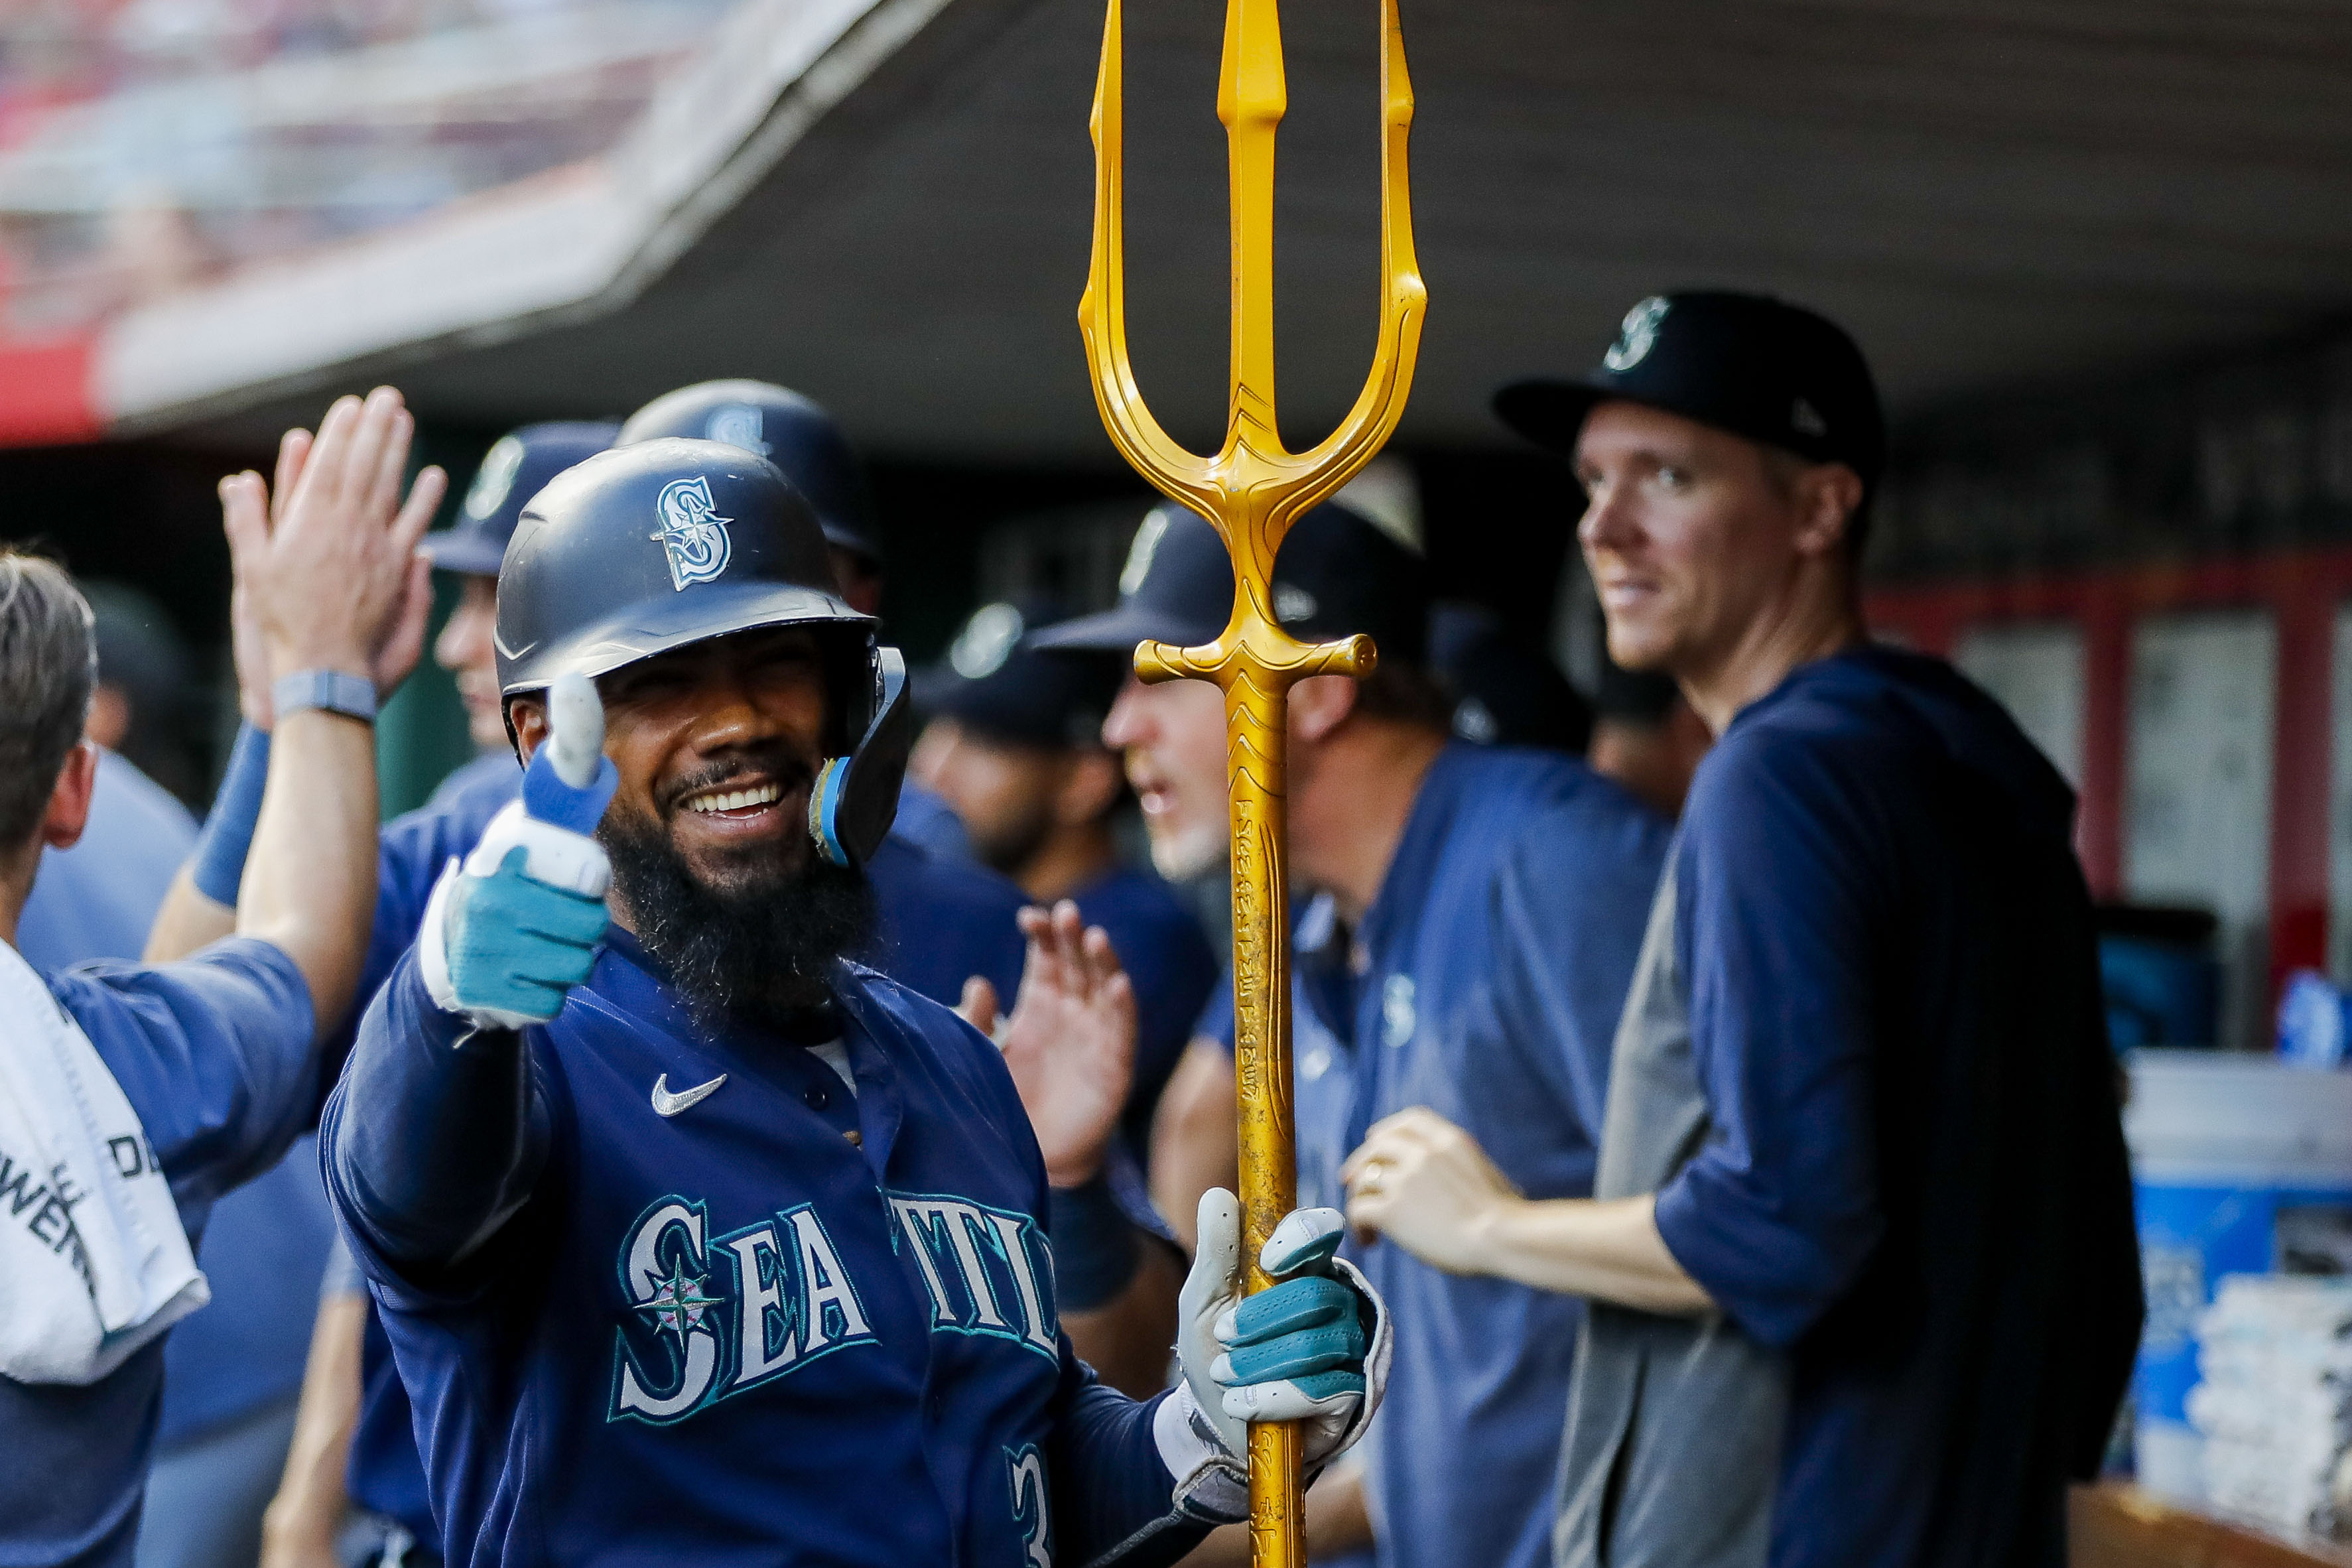 Watch: Seattle Mariners Debut New Home Run Trident